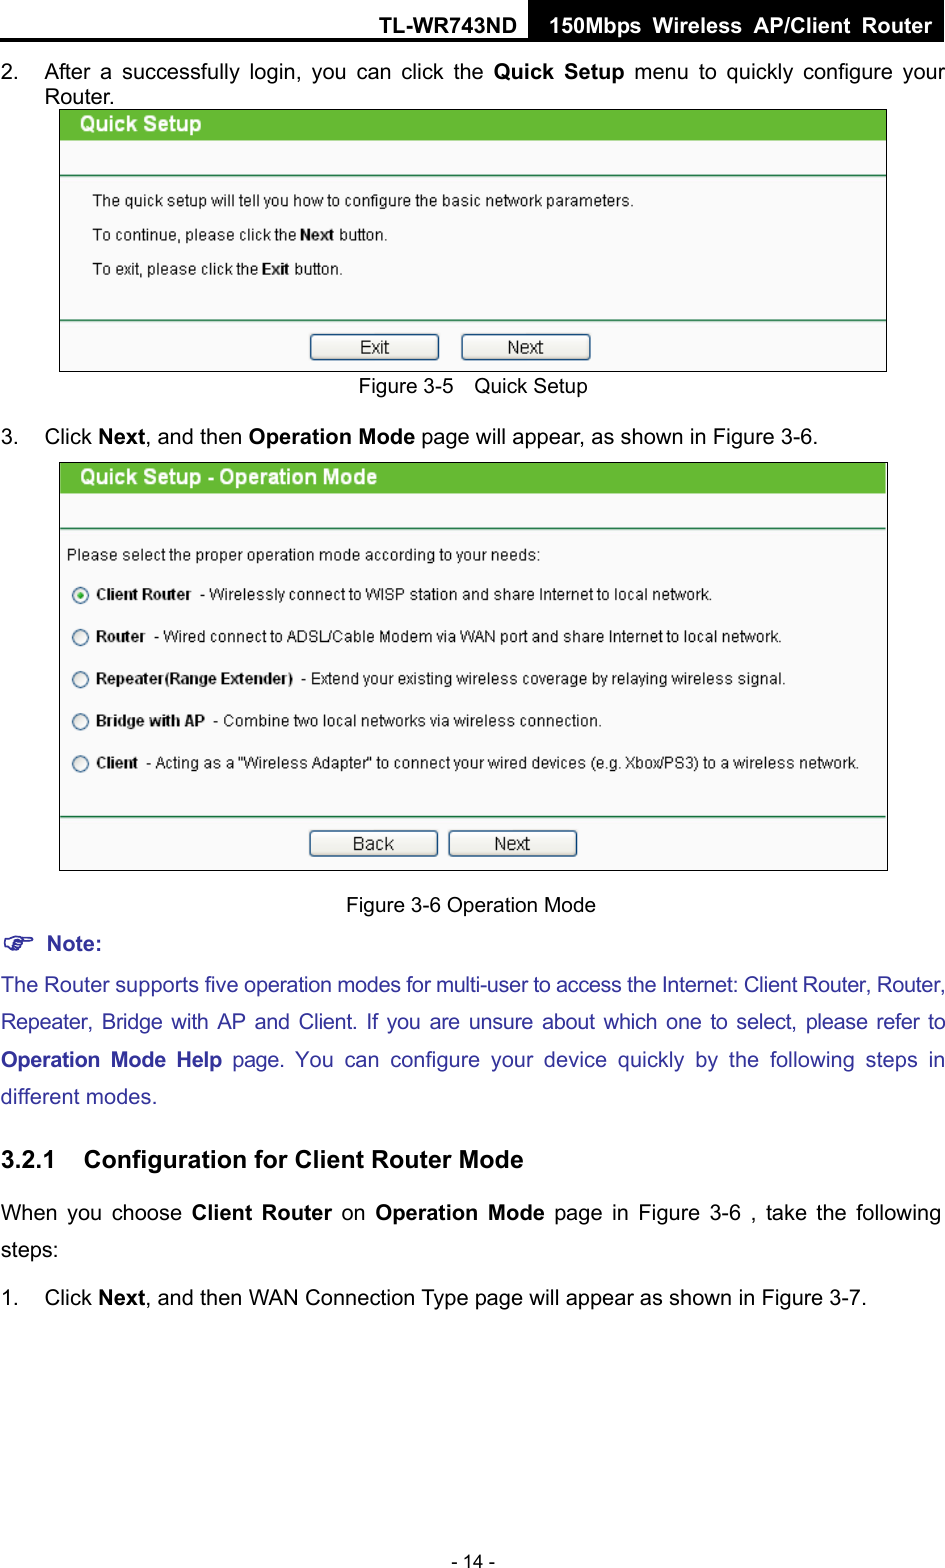 TL-WR743ND 150Mbps Wireless AP/Client Router - 14 - 2.  After a successfully login, you can click the Quick Setup menu to quickly configure your Router.   Figure 3-5    Quick Setup 3. Click Next, and then Operation Mode page will appear, as shown in Figure 3-6.  Figure 3-6 Operation Mode  Note: The Router supports five operation modes for multi-user to access the Internet: Client Router, Router, Repeater, Bridge with AP and Client. If you are unsure about which one to select, please refer to Operation Mode Help page. You can configure your device quickly by the following steps in different modes. 3.2.1  Configuration for Client Router Mode When you choose Client Router on Operation Mode page in Figure 3-6 , take the following steps: 1. Click Next, and then WAN Connection Type page will appear as shown in Figure 3-7. 